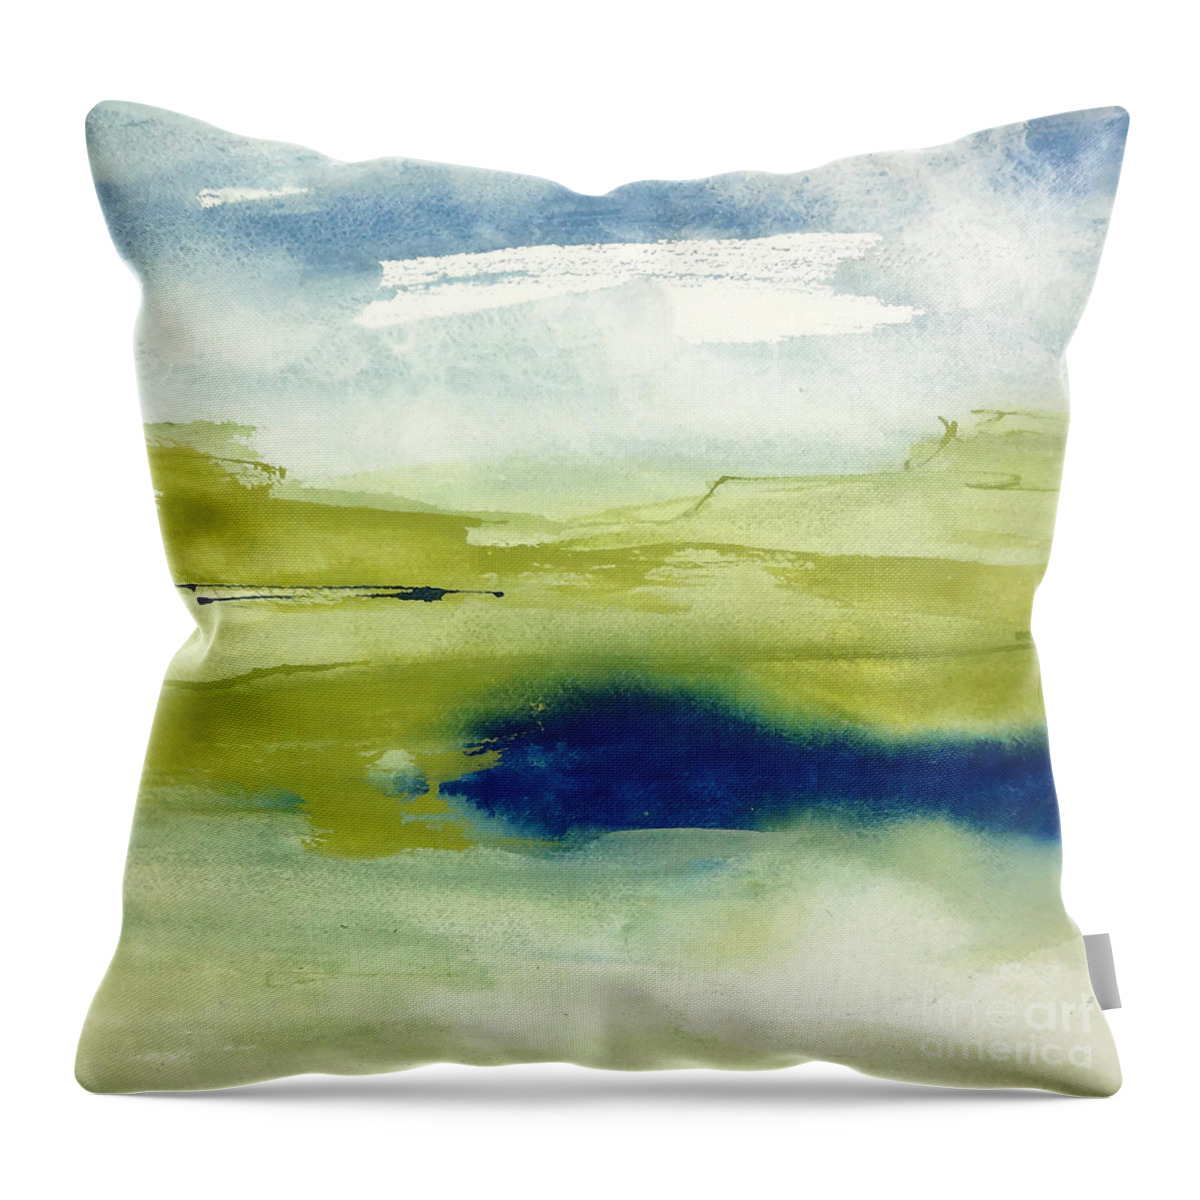 Original Watercolors Throw Pillow featuring the painting Reflection Pond 2 by Chris Paschke